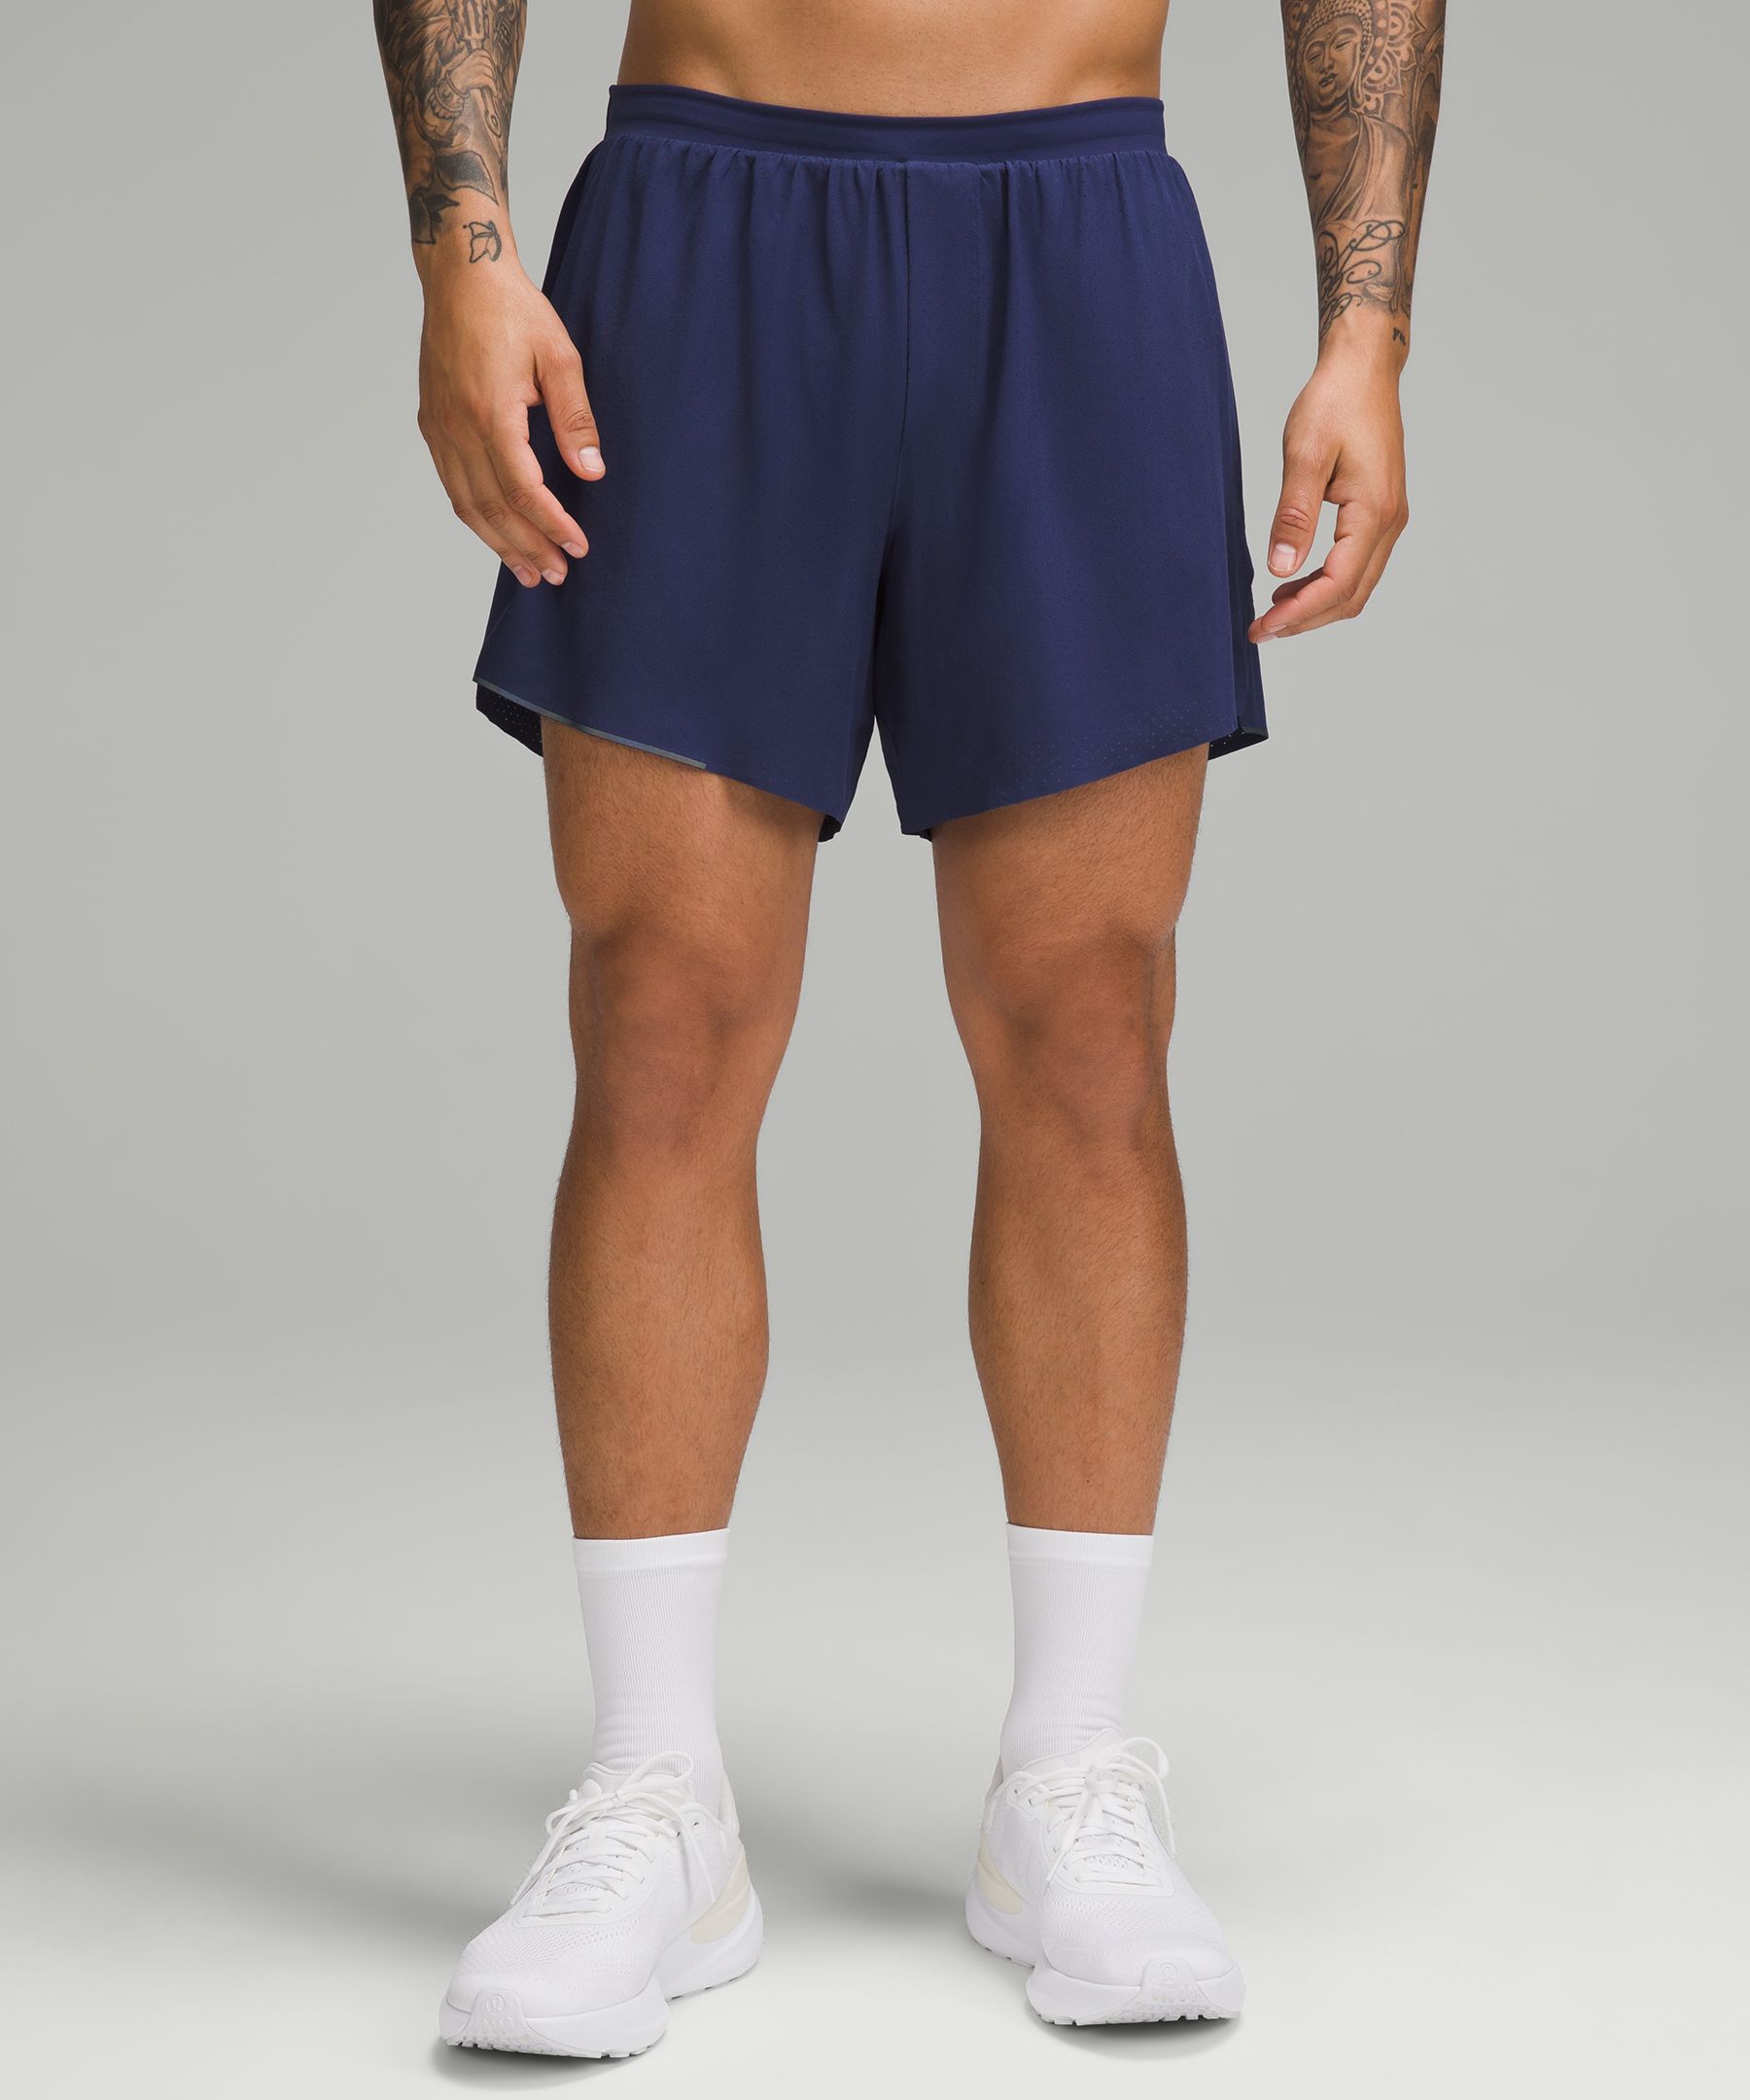 Lululemon athletica Fast and Free Short 5 *Airflow